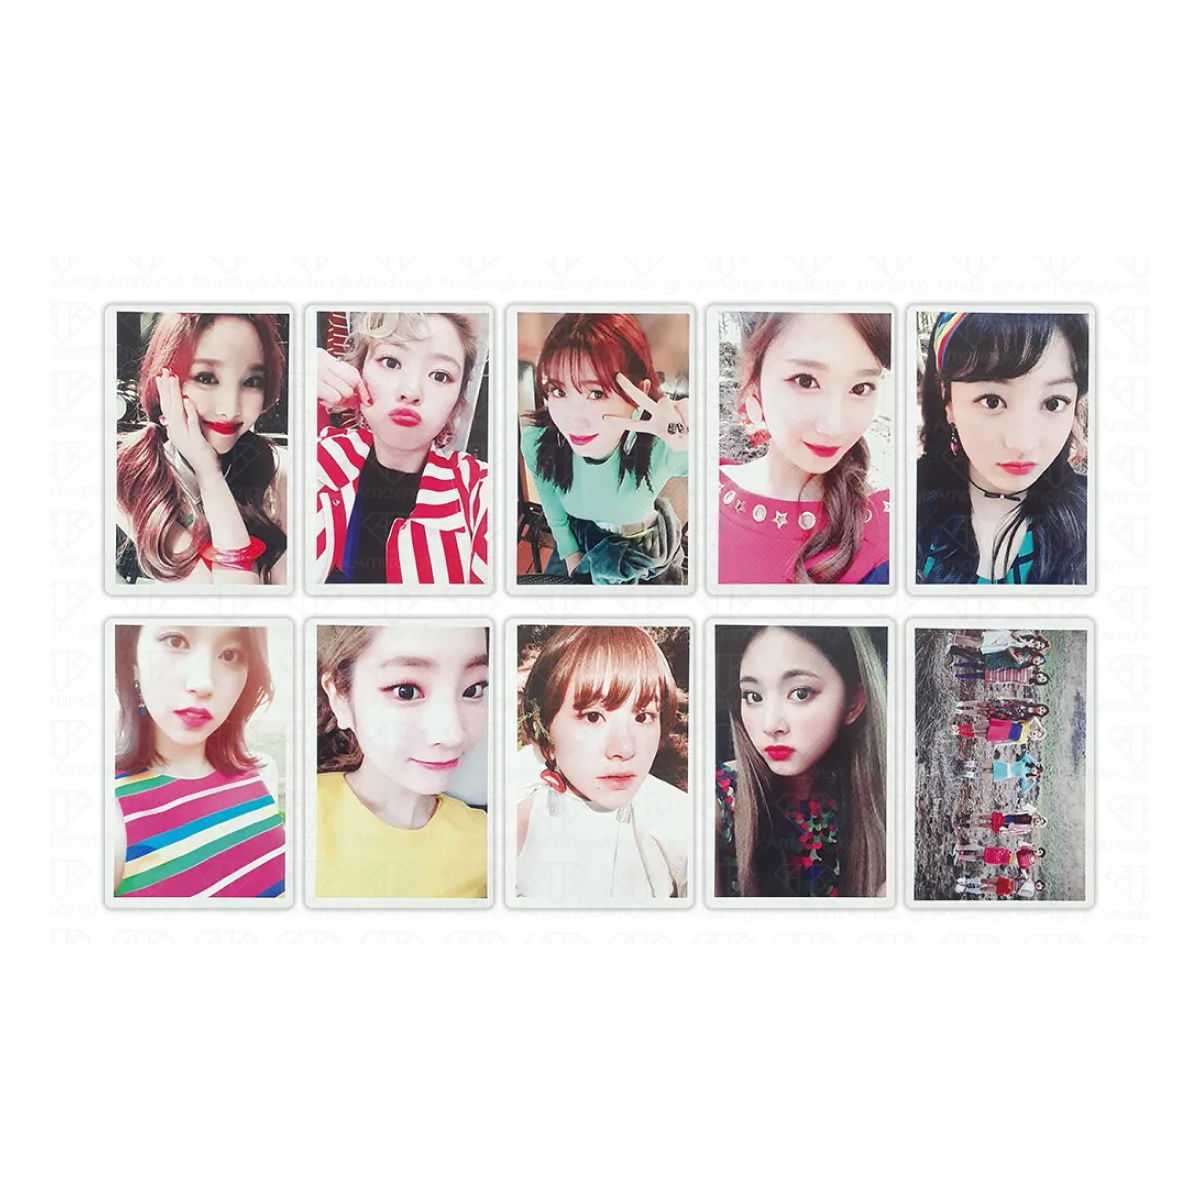 (Collect) Original Photocards - TWICE (SIGNAL)- Pre-order Photocards